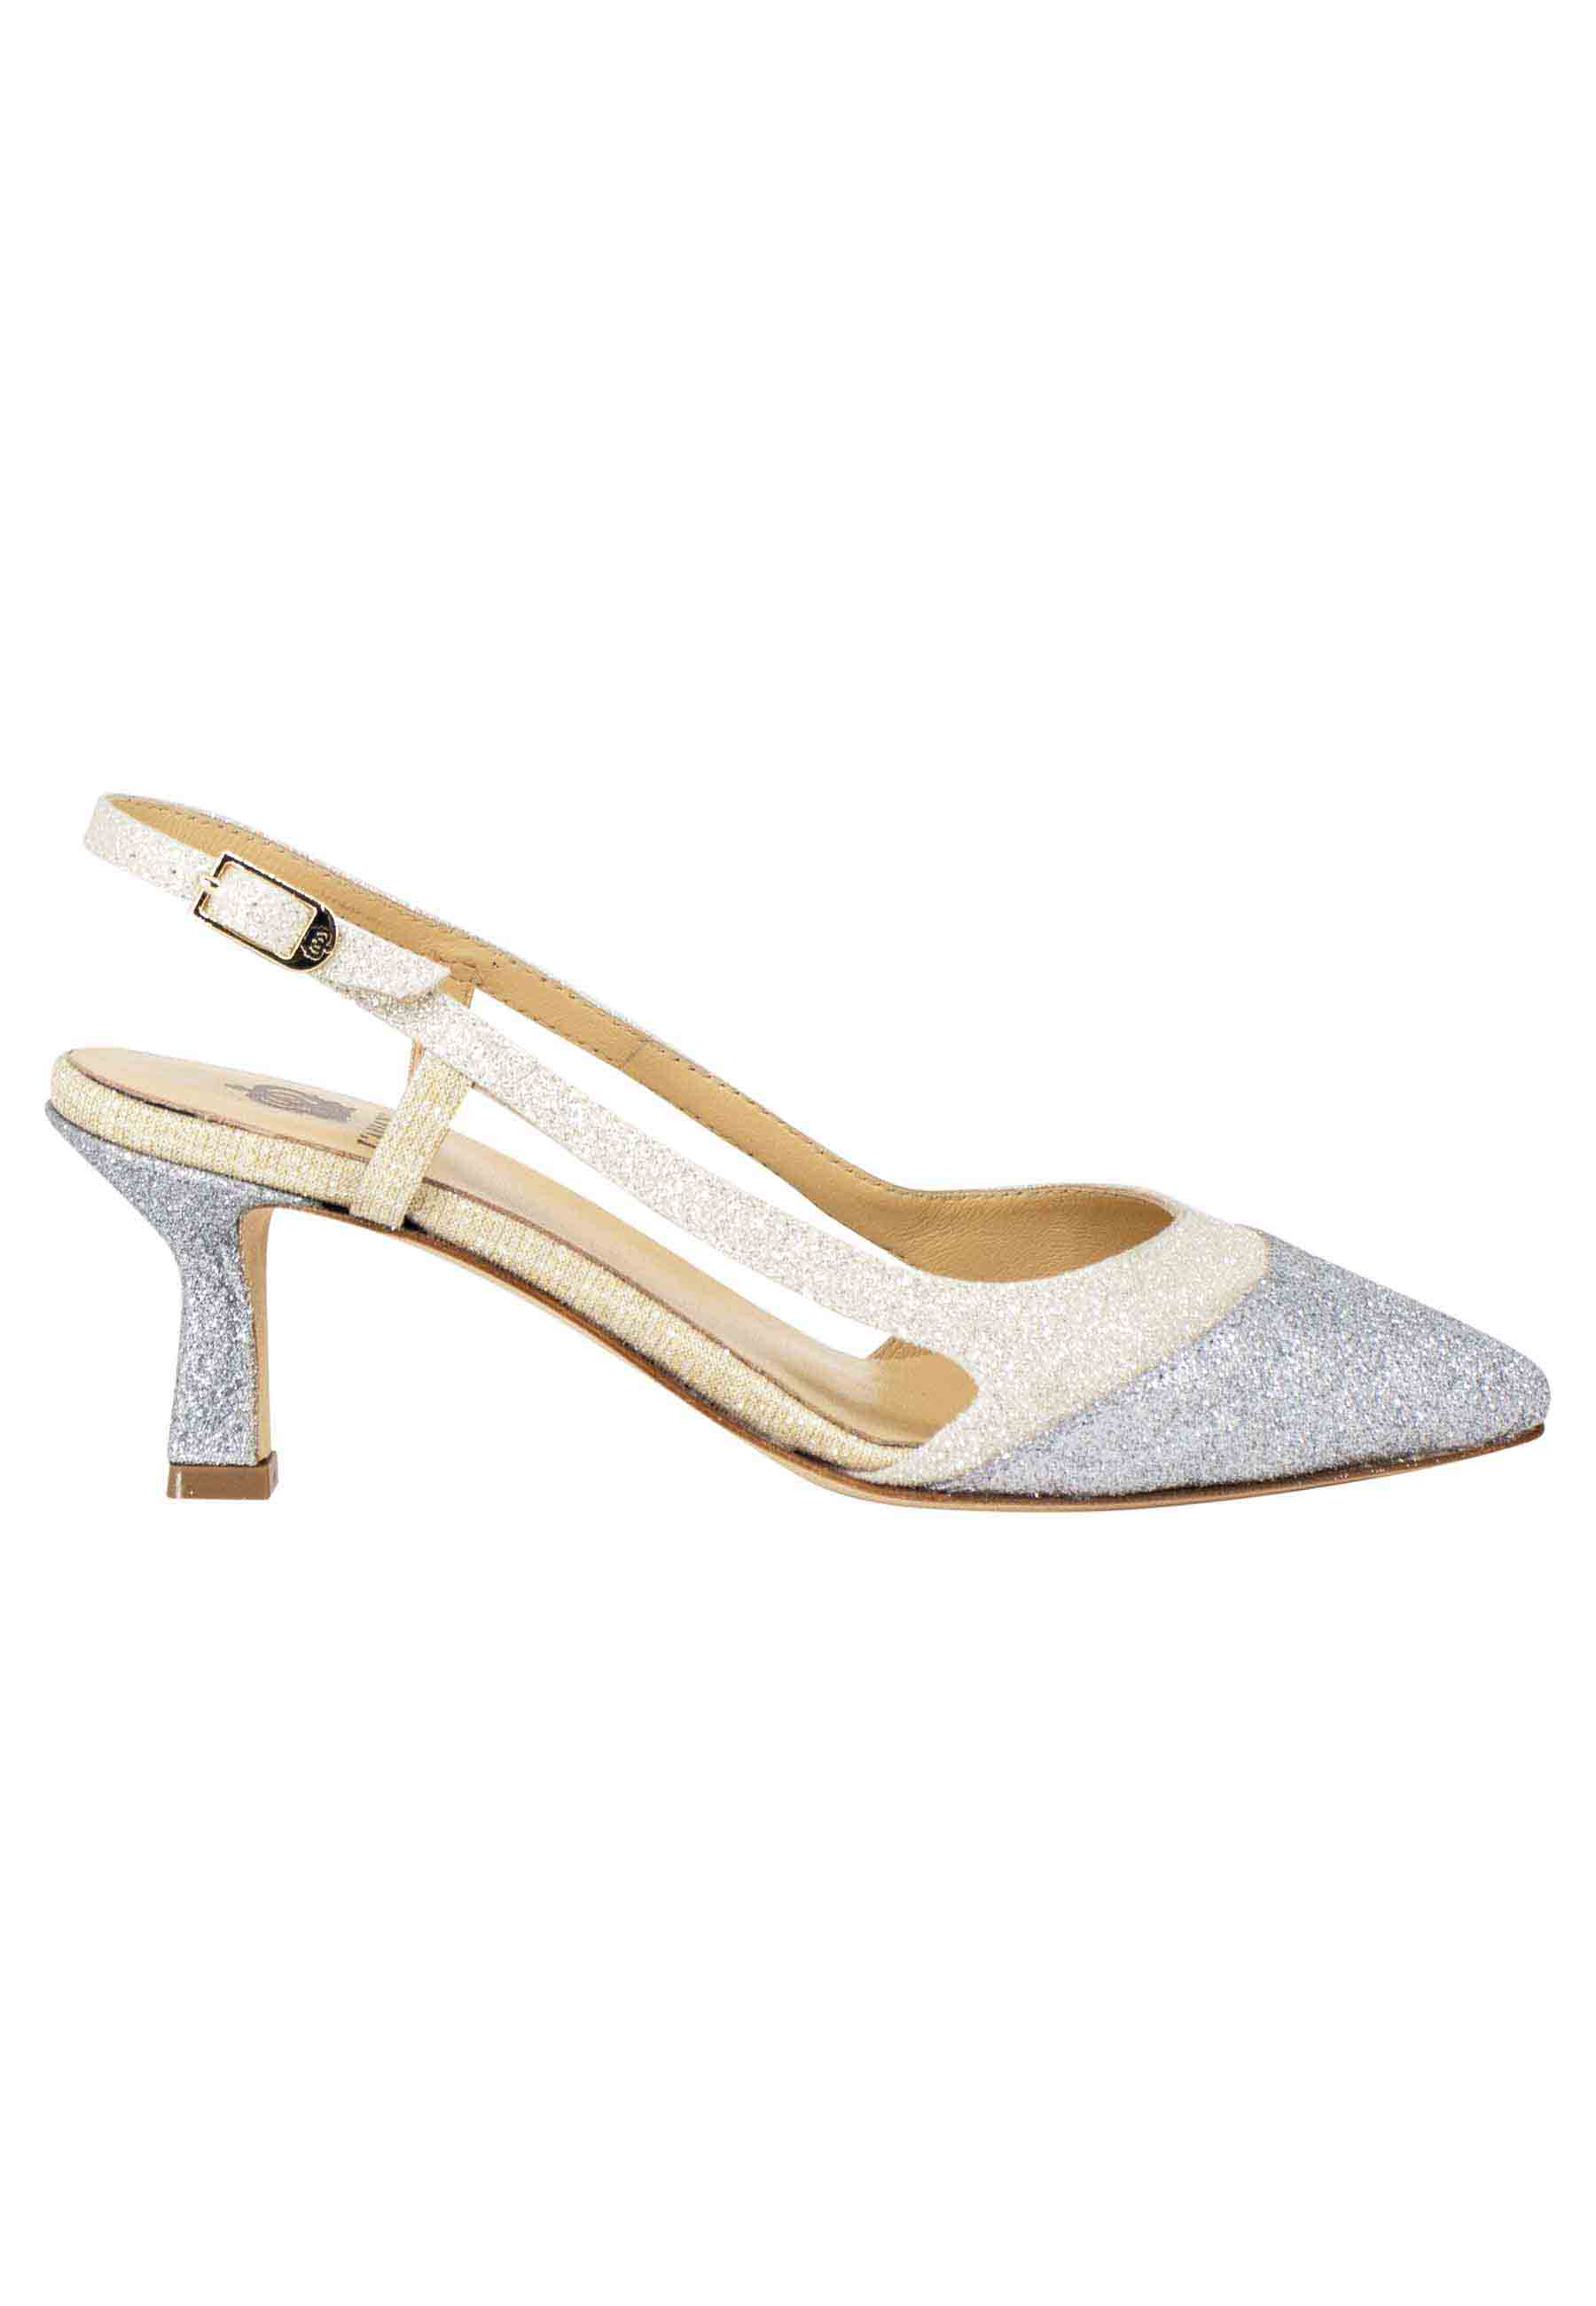 Women's slingback pumps in silver and gold fabric